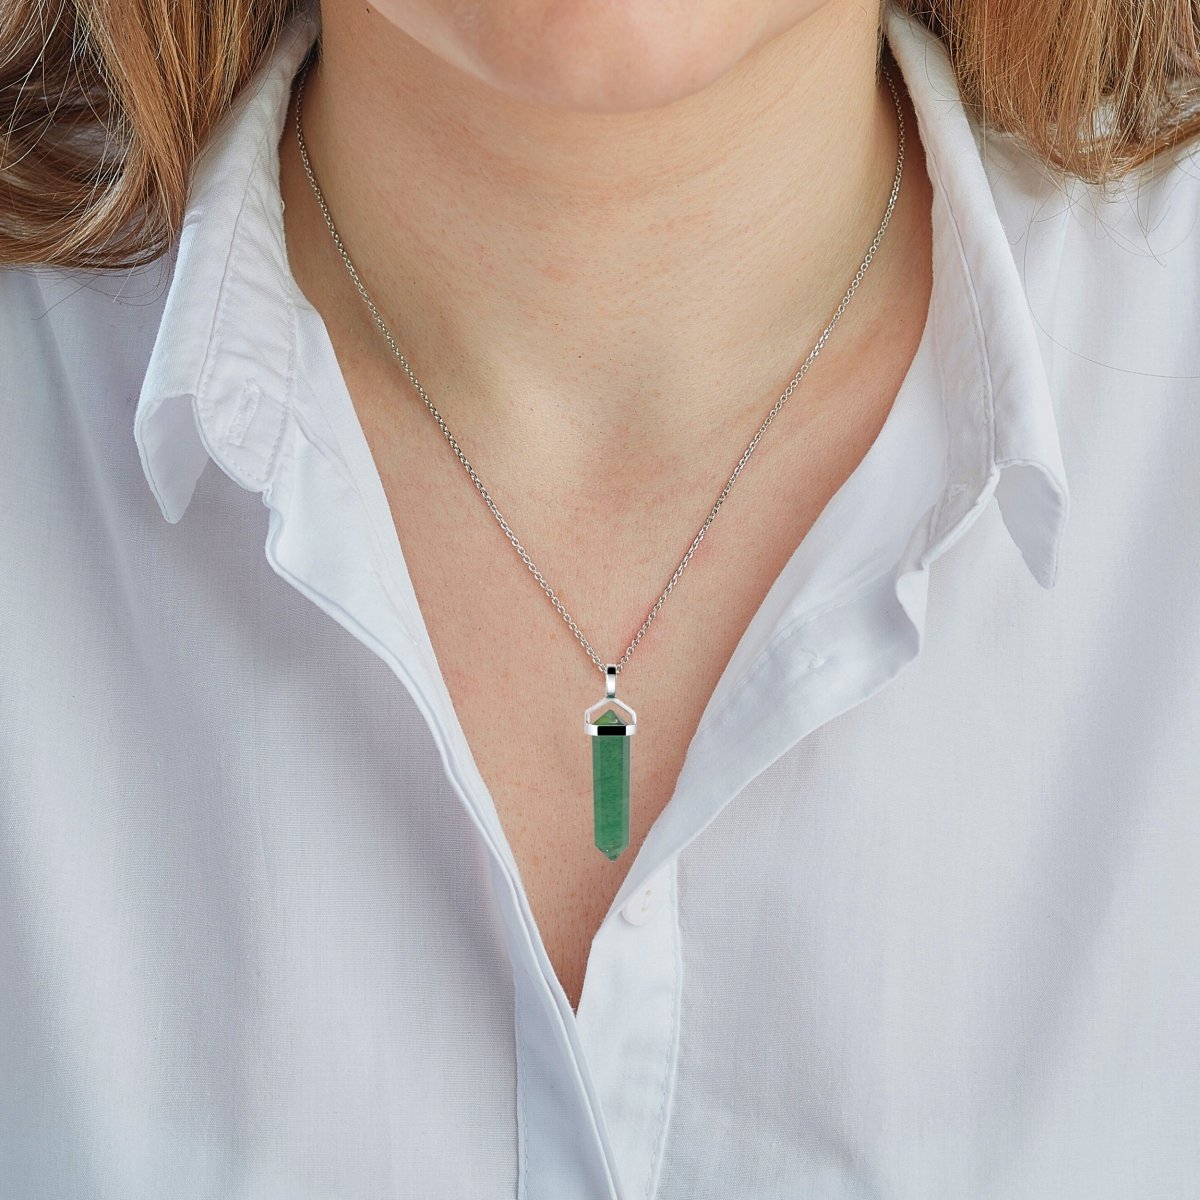 Electric Green Stone Necklace Set | Stone necklace set, Green stone necklace,  Stone necklace